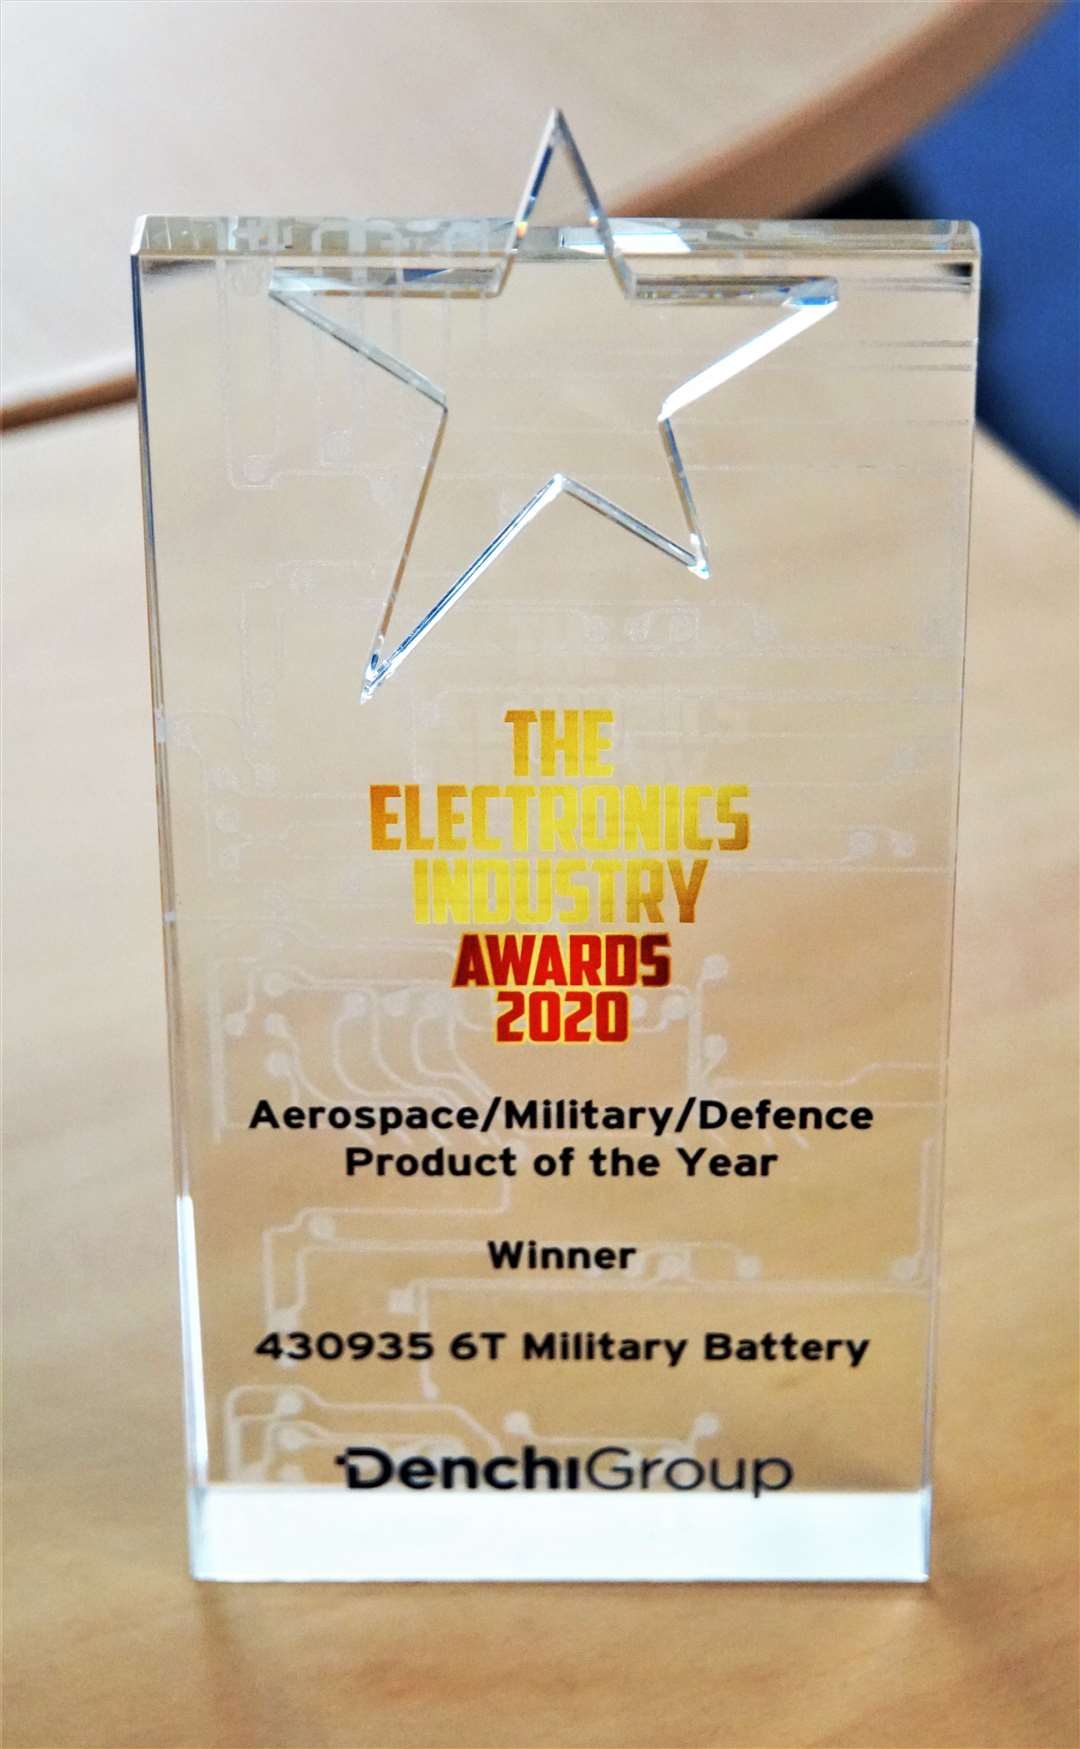 Denchi Group recently won this trophy at The Electronics Industry Awards 2020 in the category 'Aerospace/Military/Defence Product of the Year'.